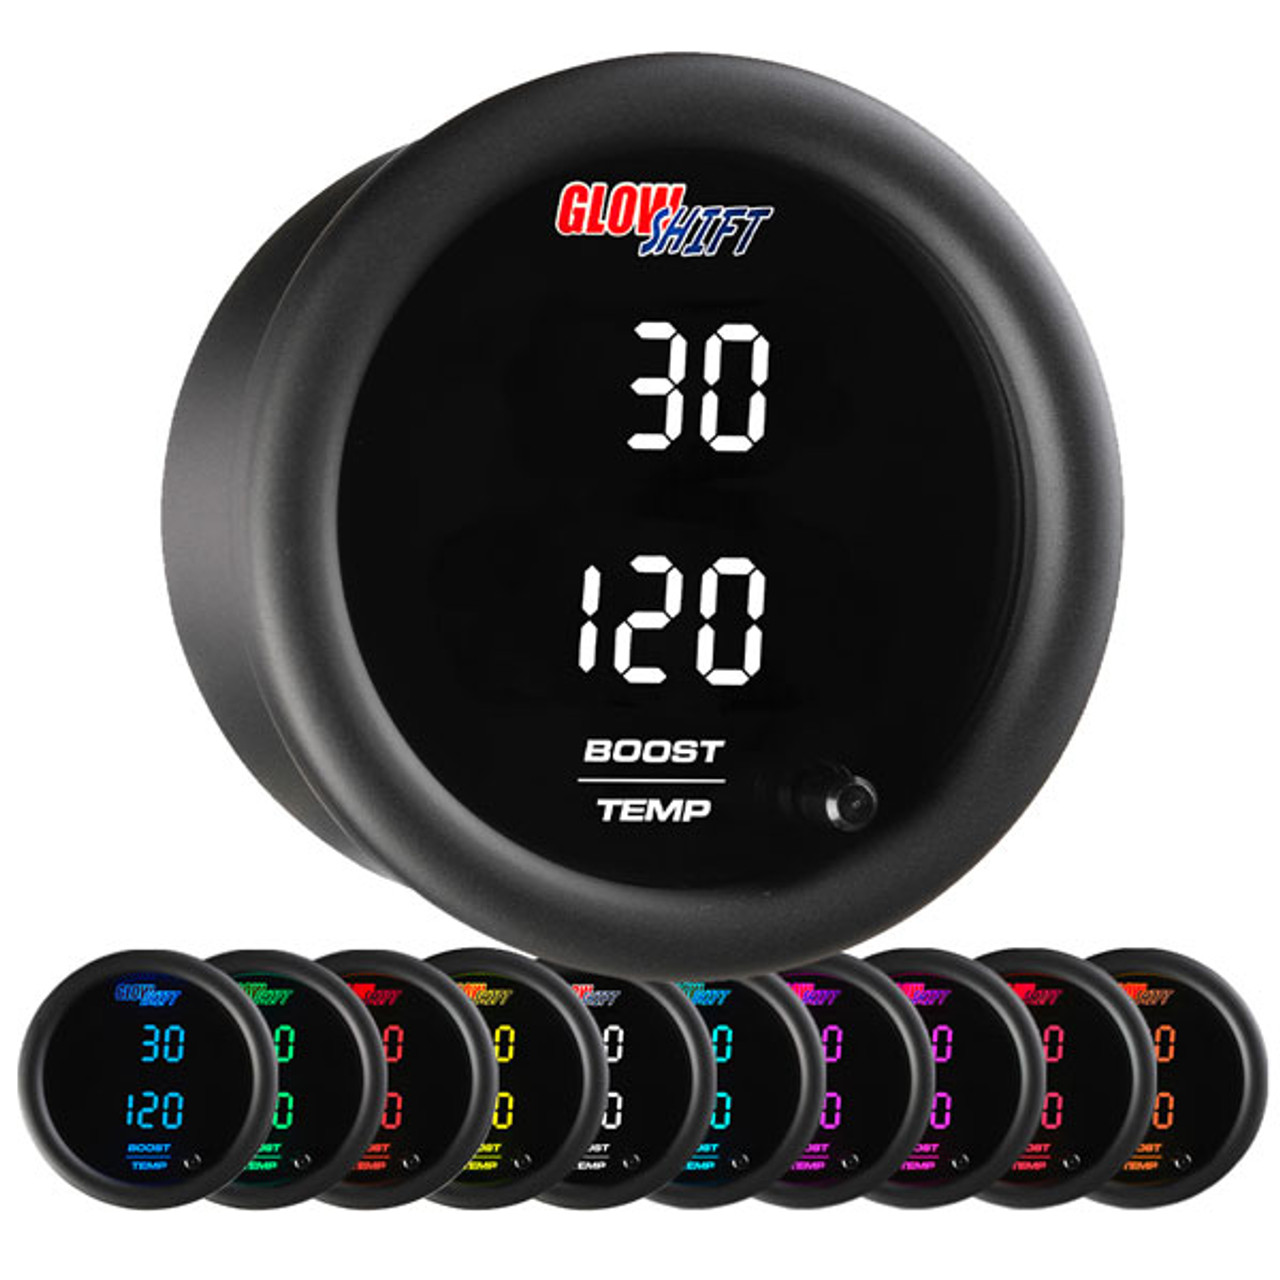  GlowShift 10 Color Digital Air Temperature Gauge Kit - Reads  Outside Air Temp from -40-200 Degrees F - Includes Sensor - Multi-Color LED  Display - Tinted Lens - 2-1/16 (52mm) : Automotive